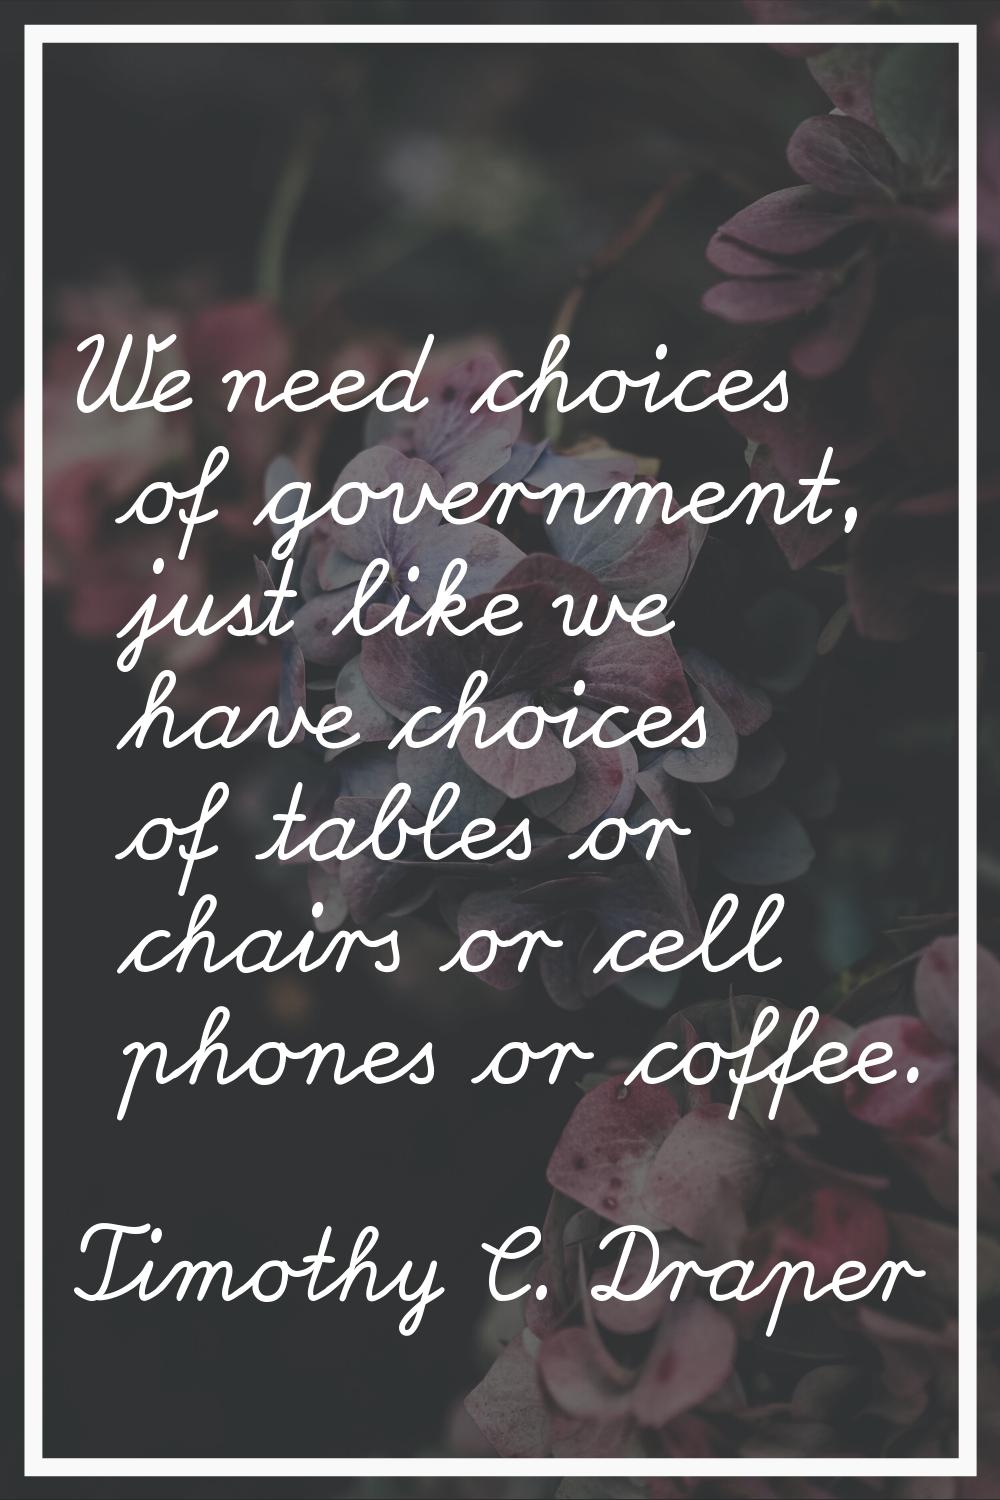 We need choices of government, just like we have choices of tables or chairs or cell phones or coff